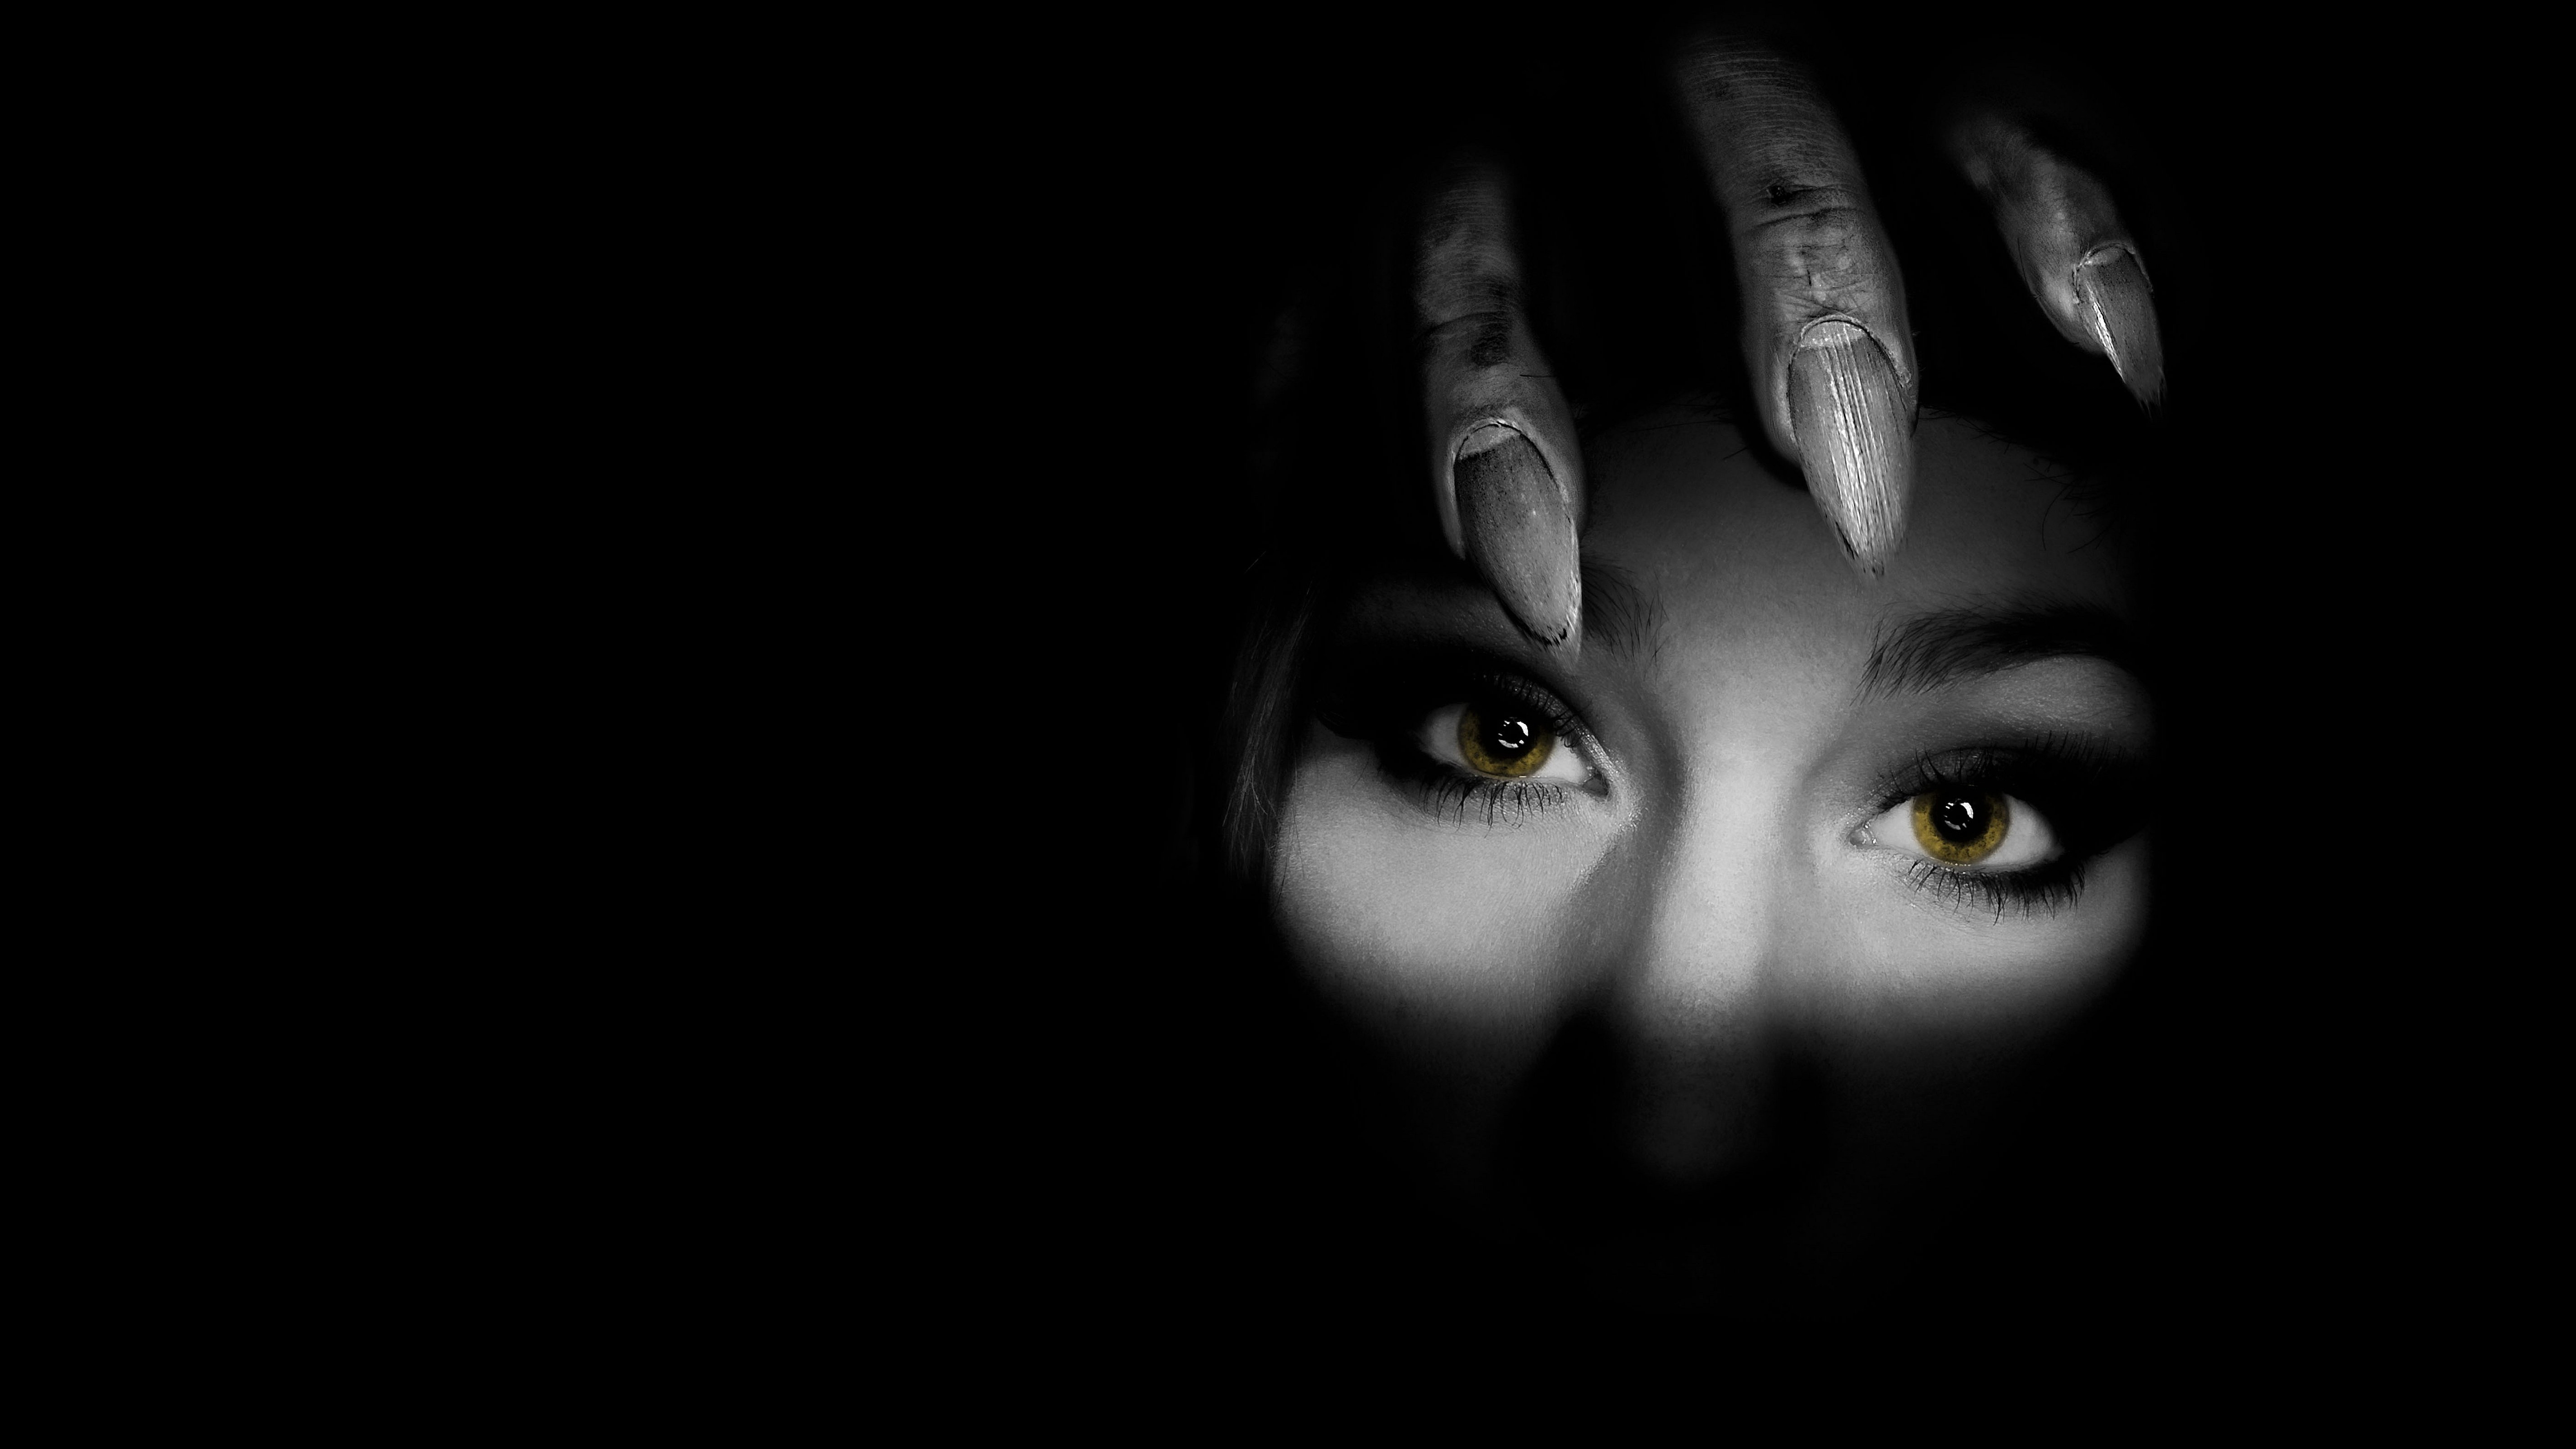 Scary Face Black Background - 5700x3206 Wallpaper 